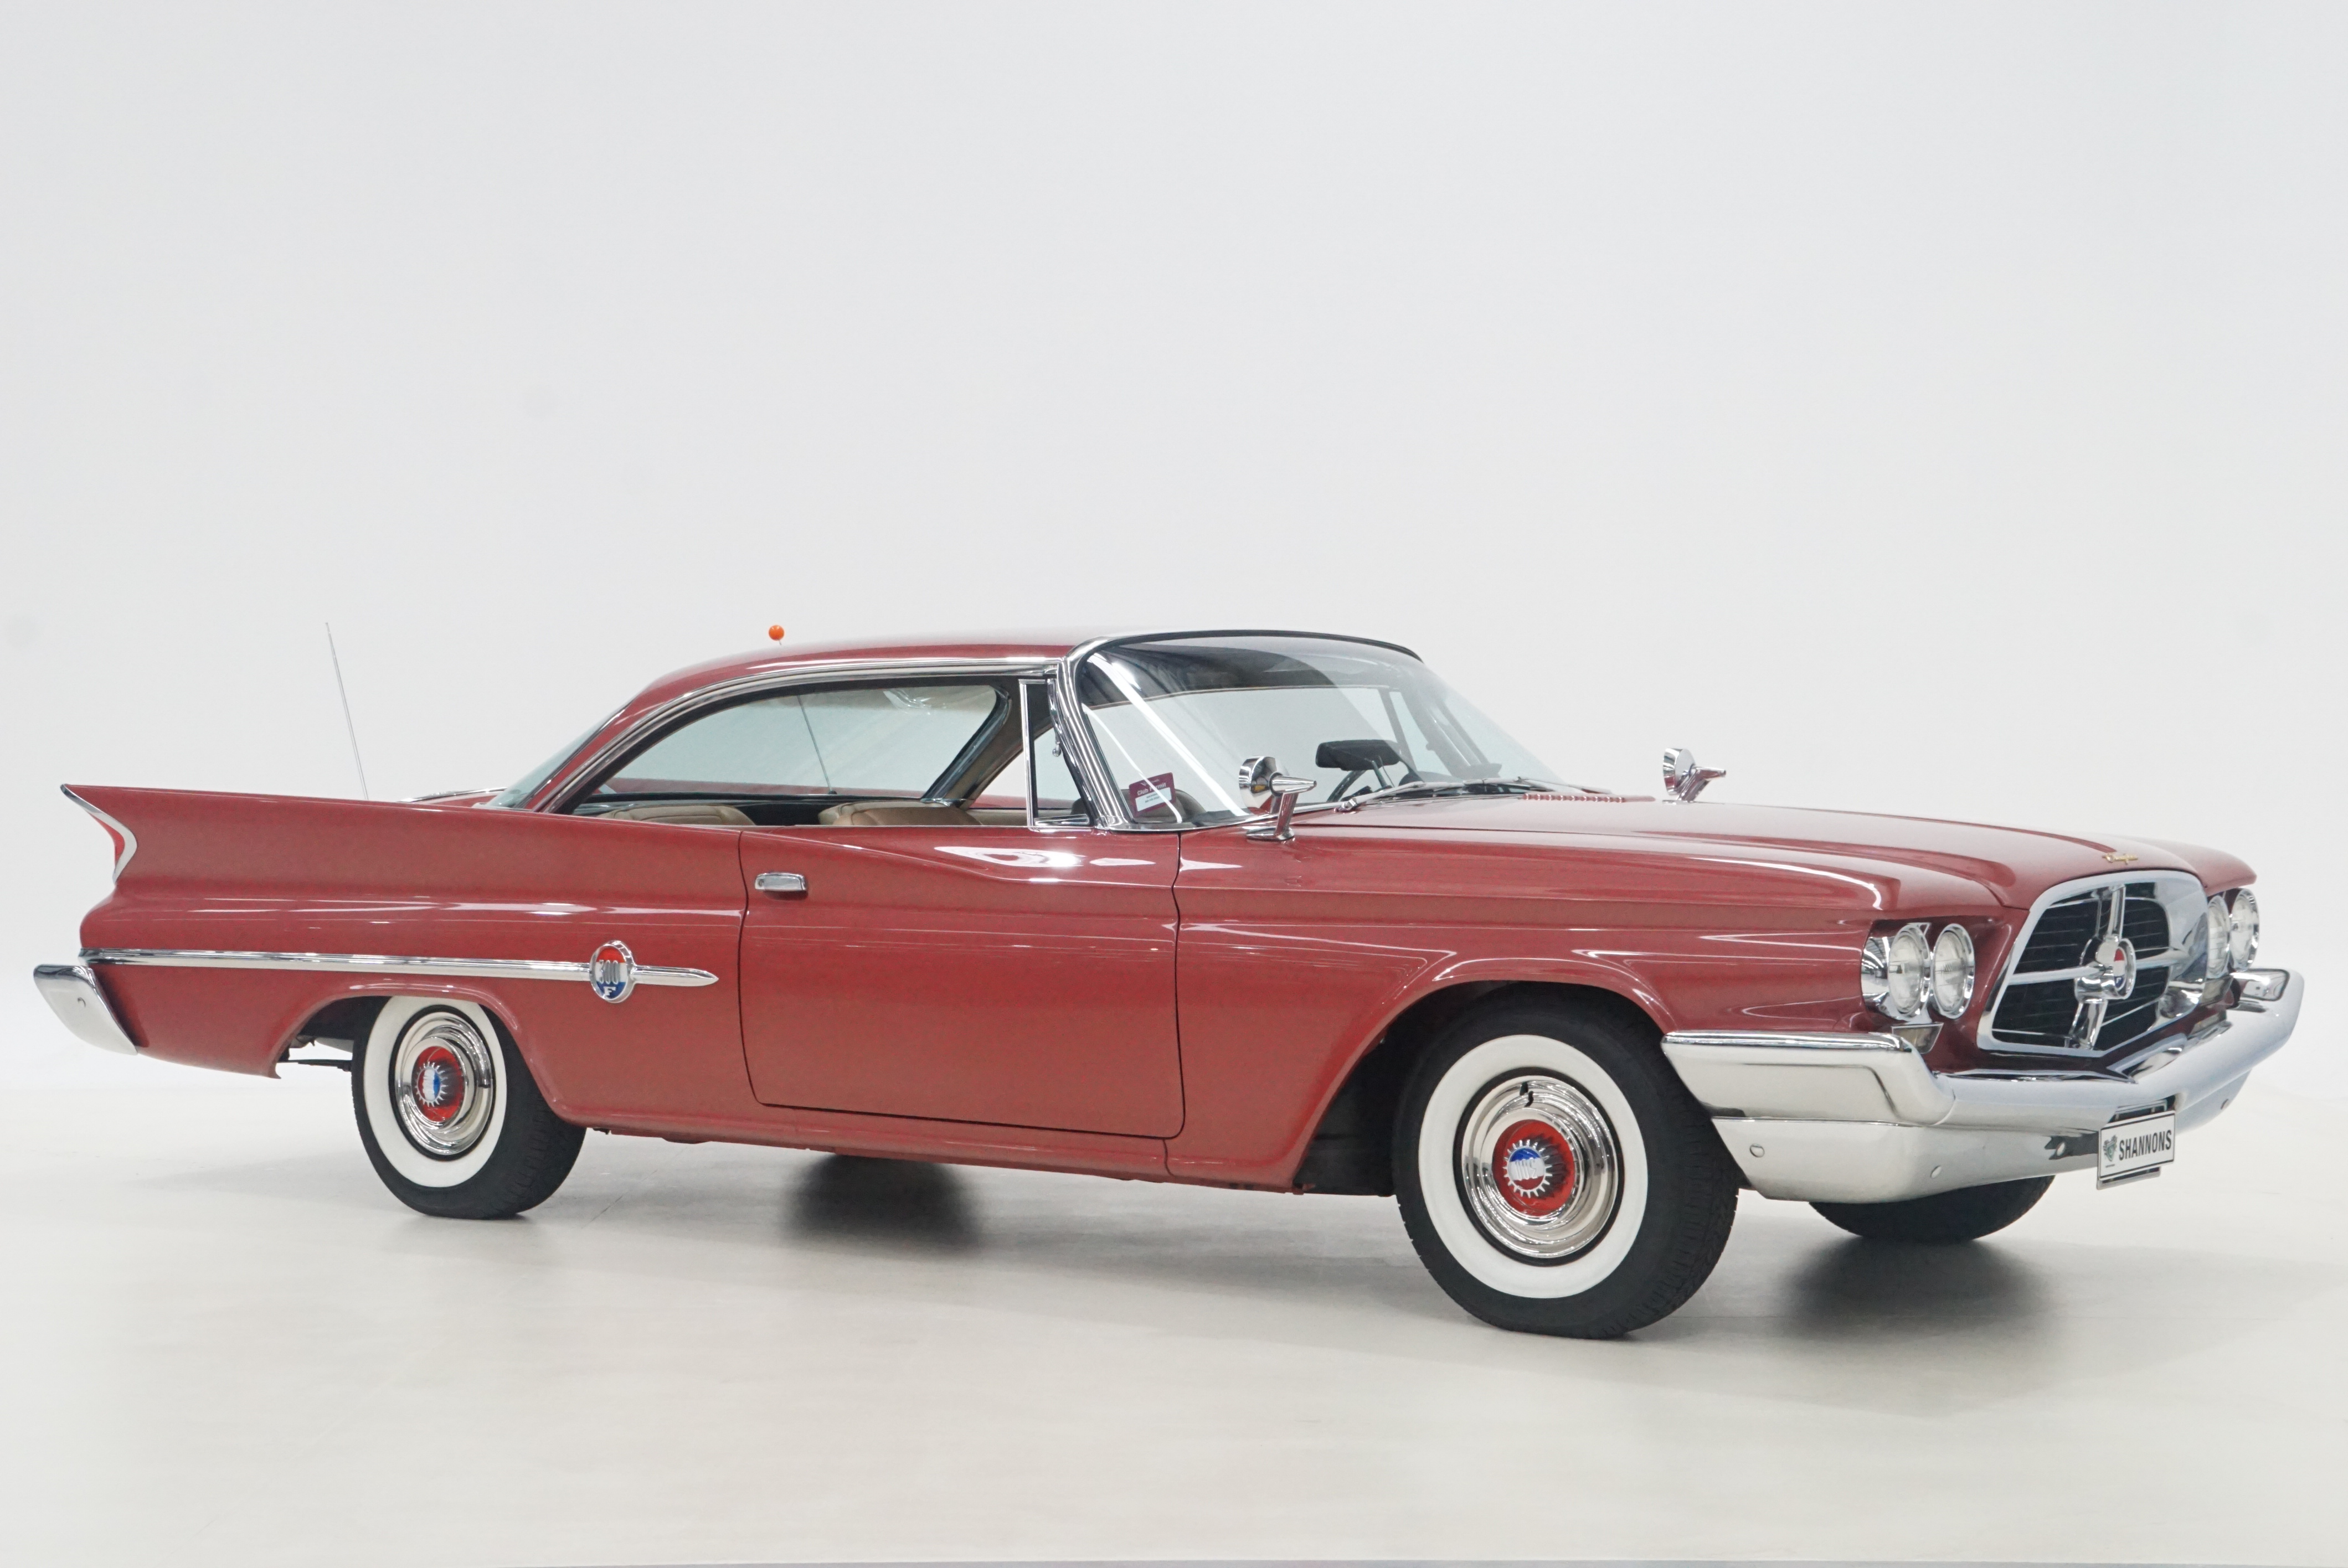 This stunning 1960 Chrysler 300F Hardtop with many options is expected to sell in the $110,000 - $120,000 range at Shannons Timed Online Spring Auction from August 31-September 7.